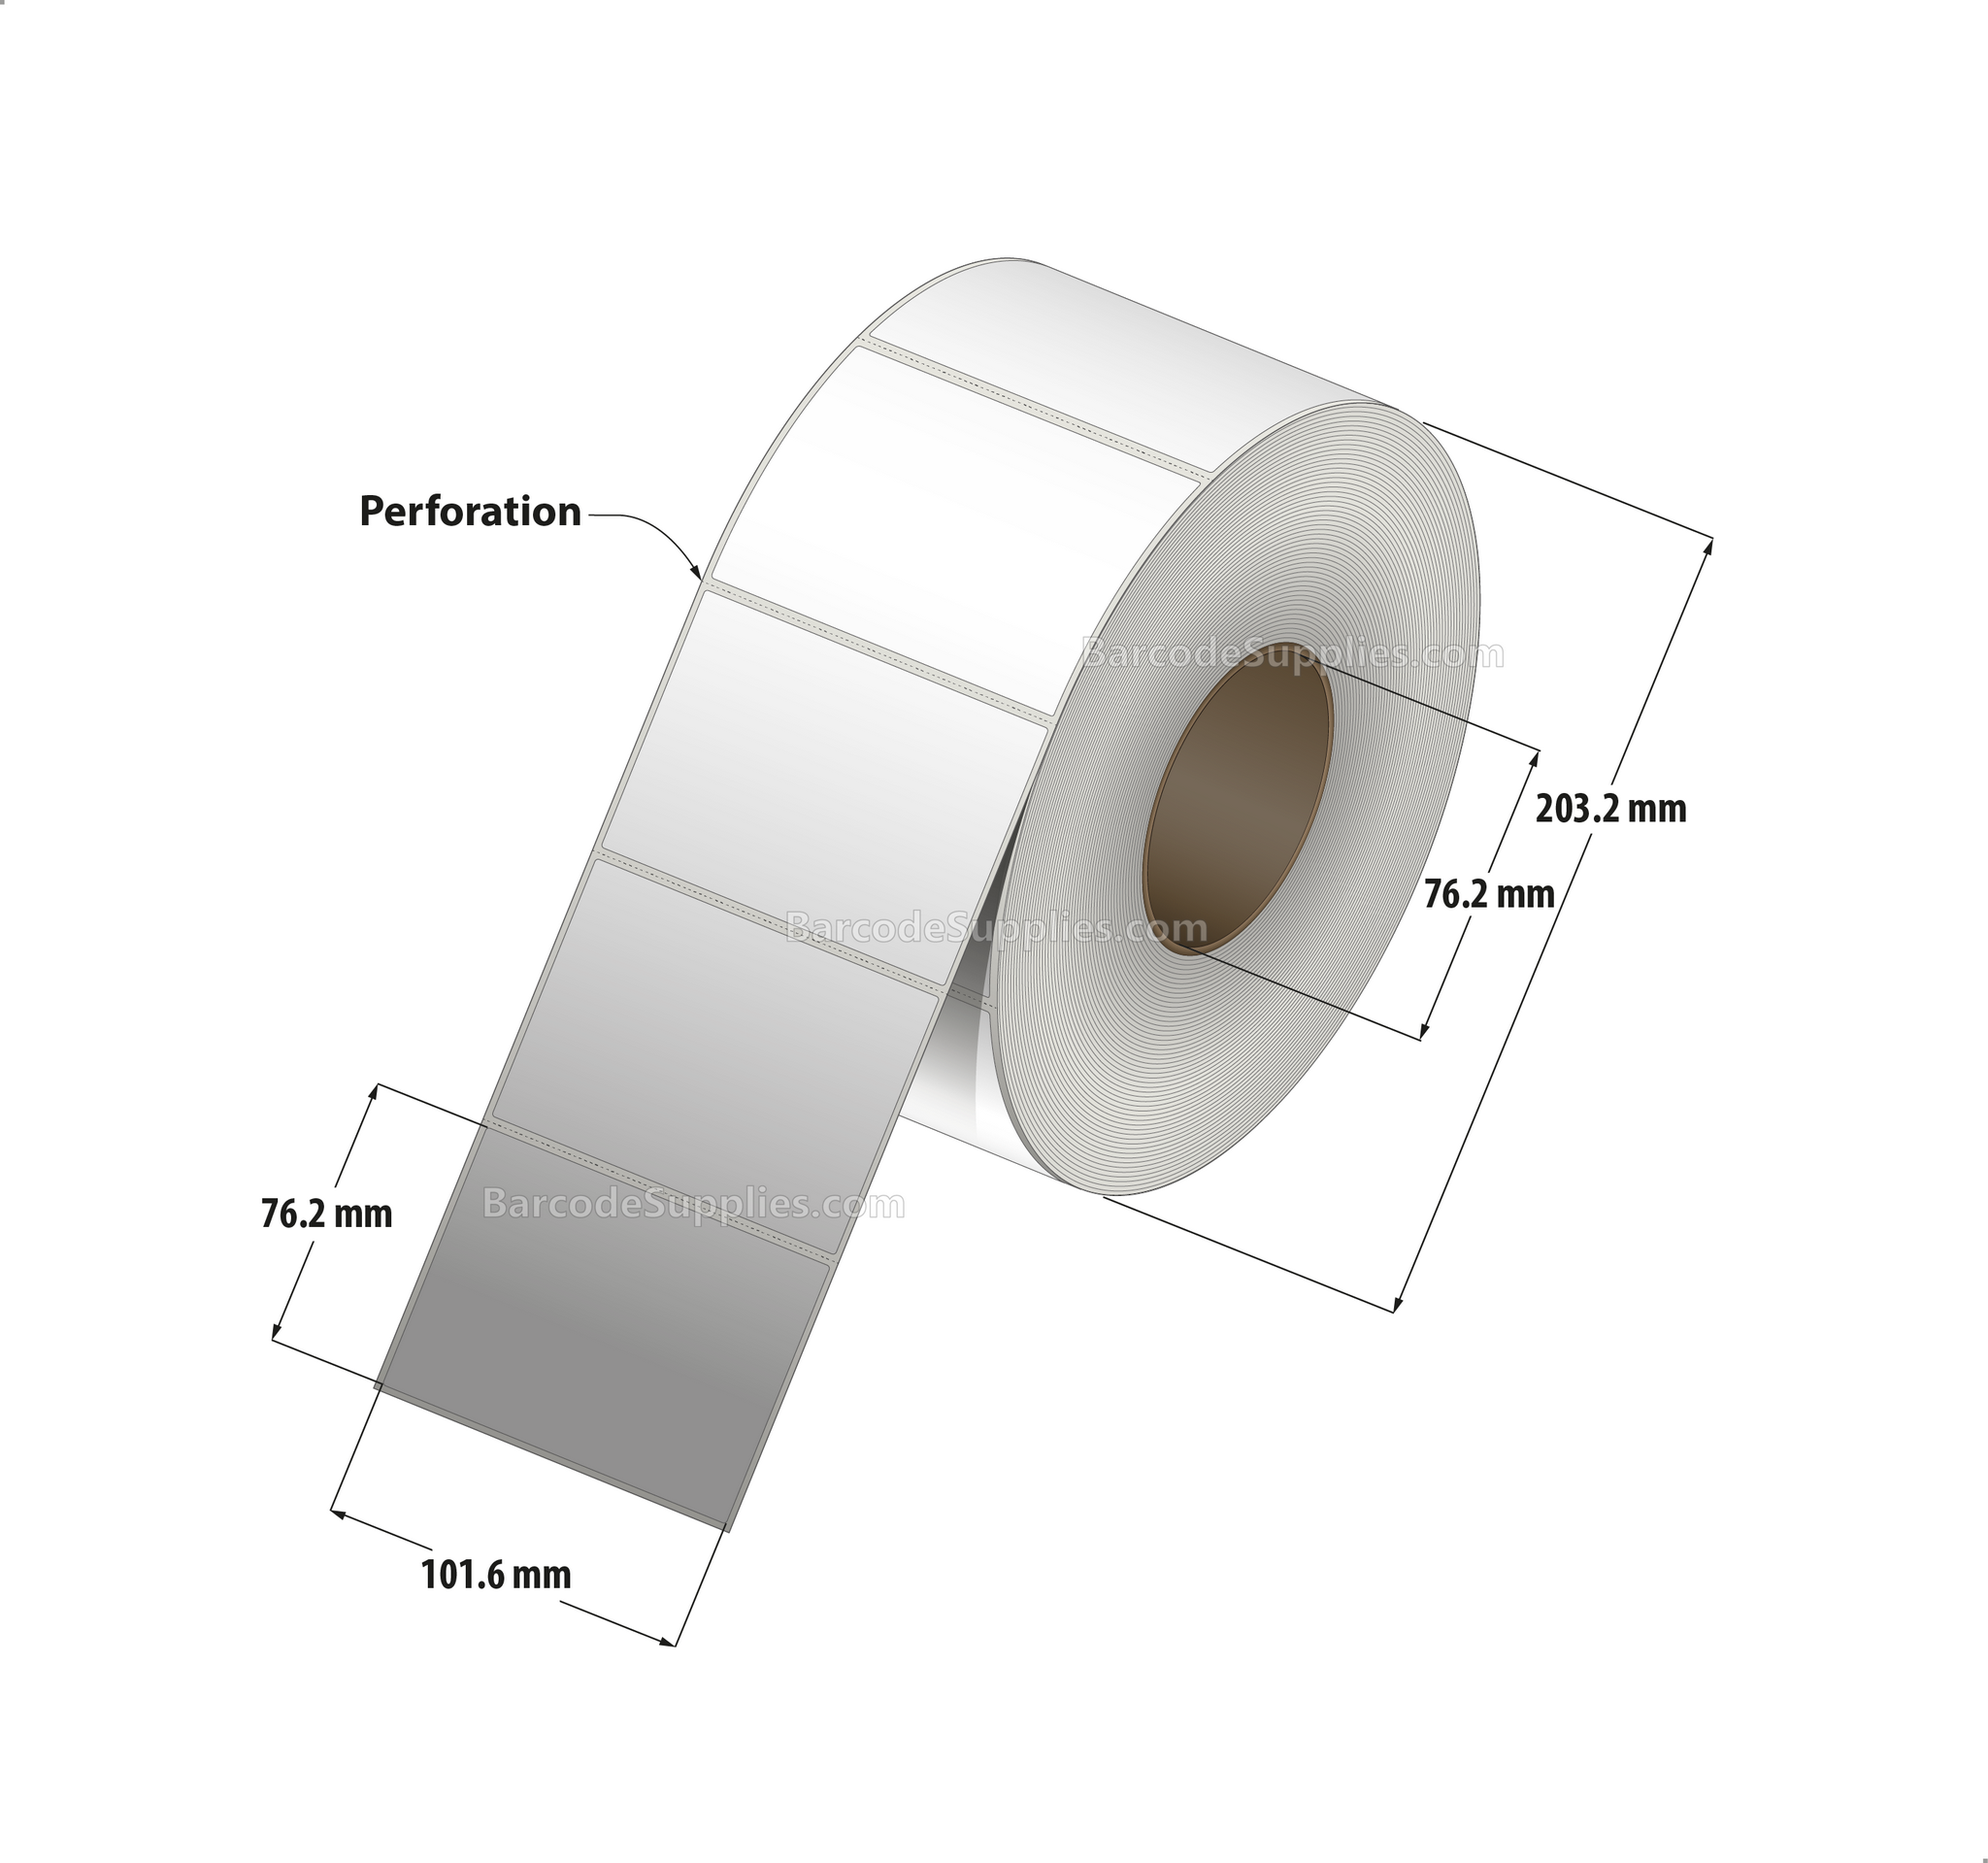 4 x 3 Thermal Transfer White Labels With Permanent Adhesive - Perforated - 2000 Labels Per Roll - Carton Of 4 Rolls - 8000 Labels Total - MPN: RSP-4-3-2000-3